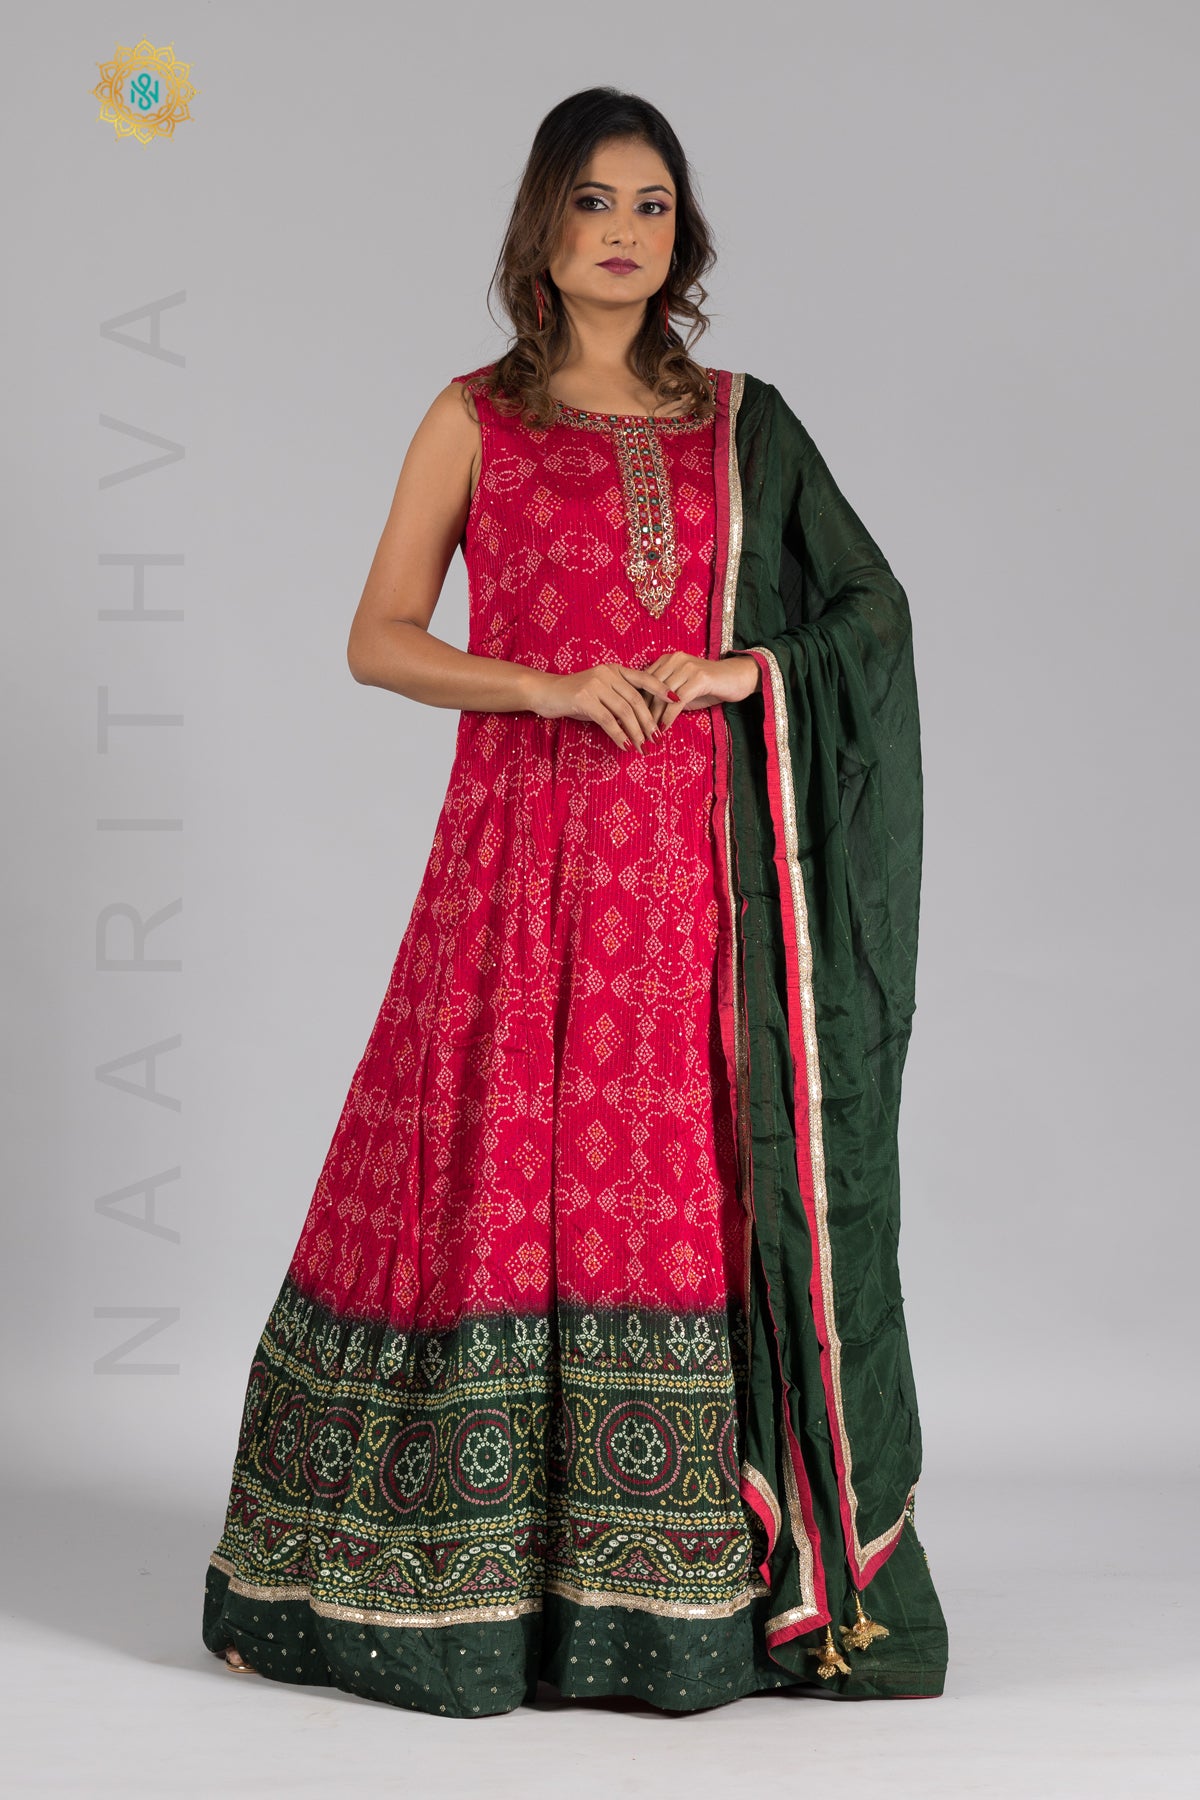 PINK WITH GREEN - PARTY WEAR GOWN WITH NECK LINE HAND WORK & DUPATTA